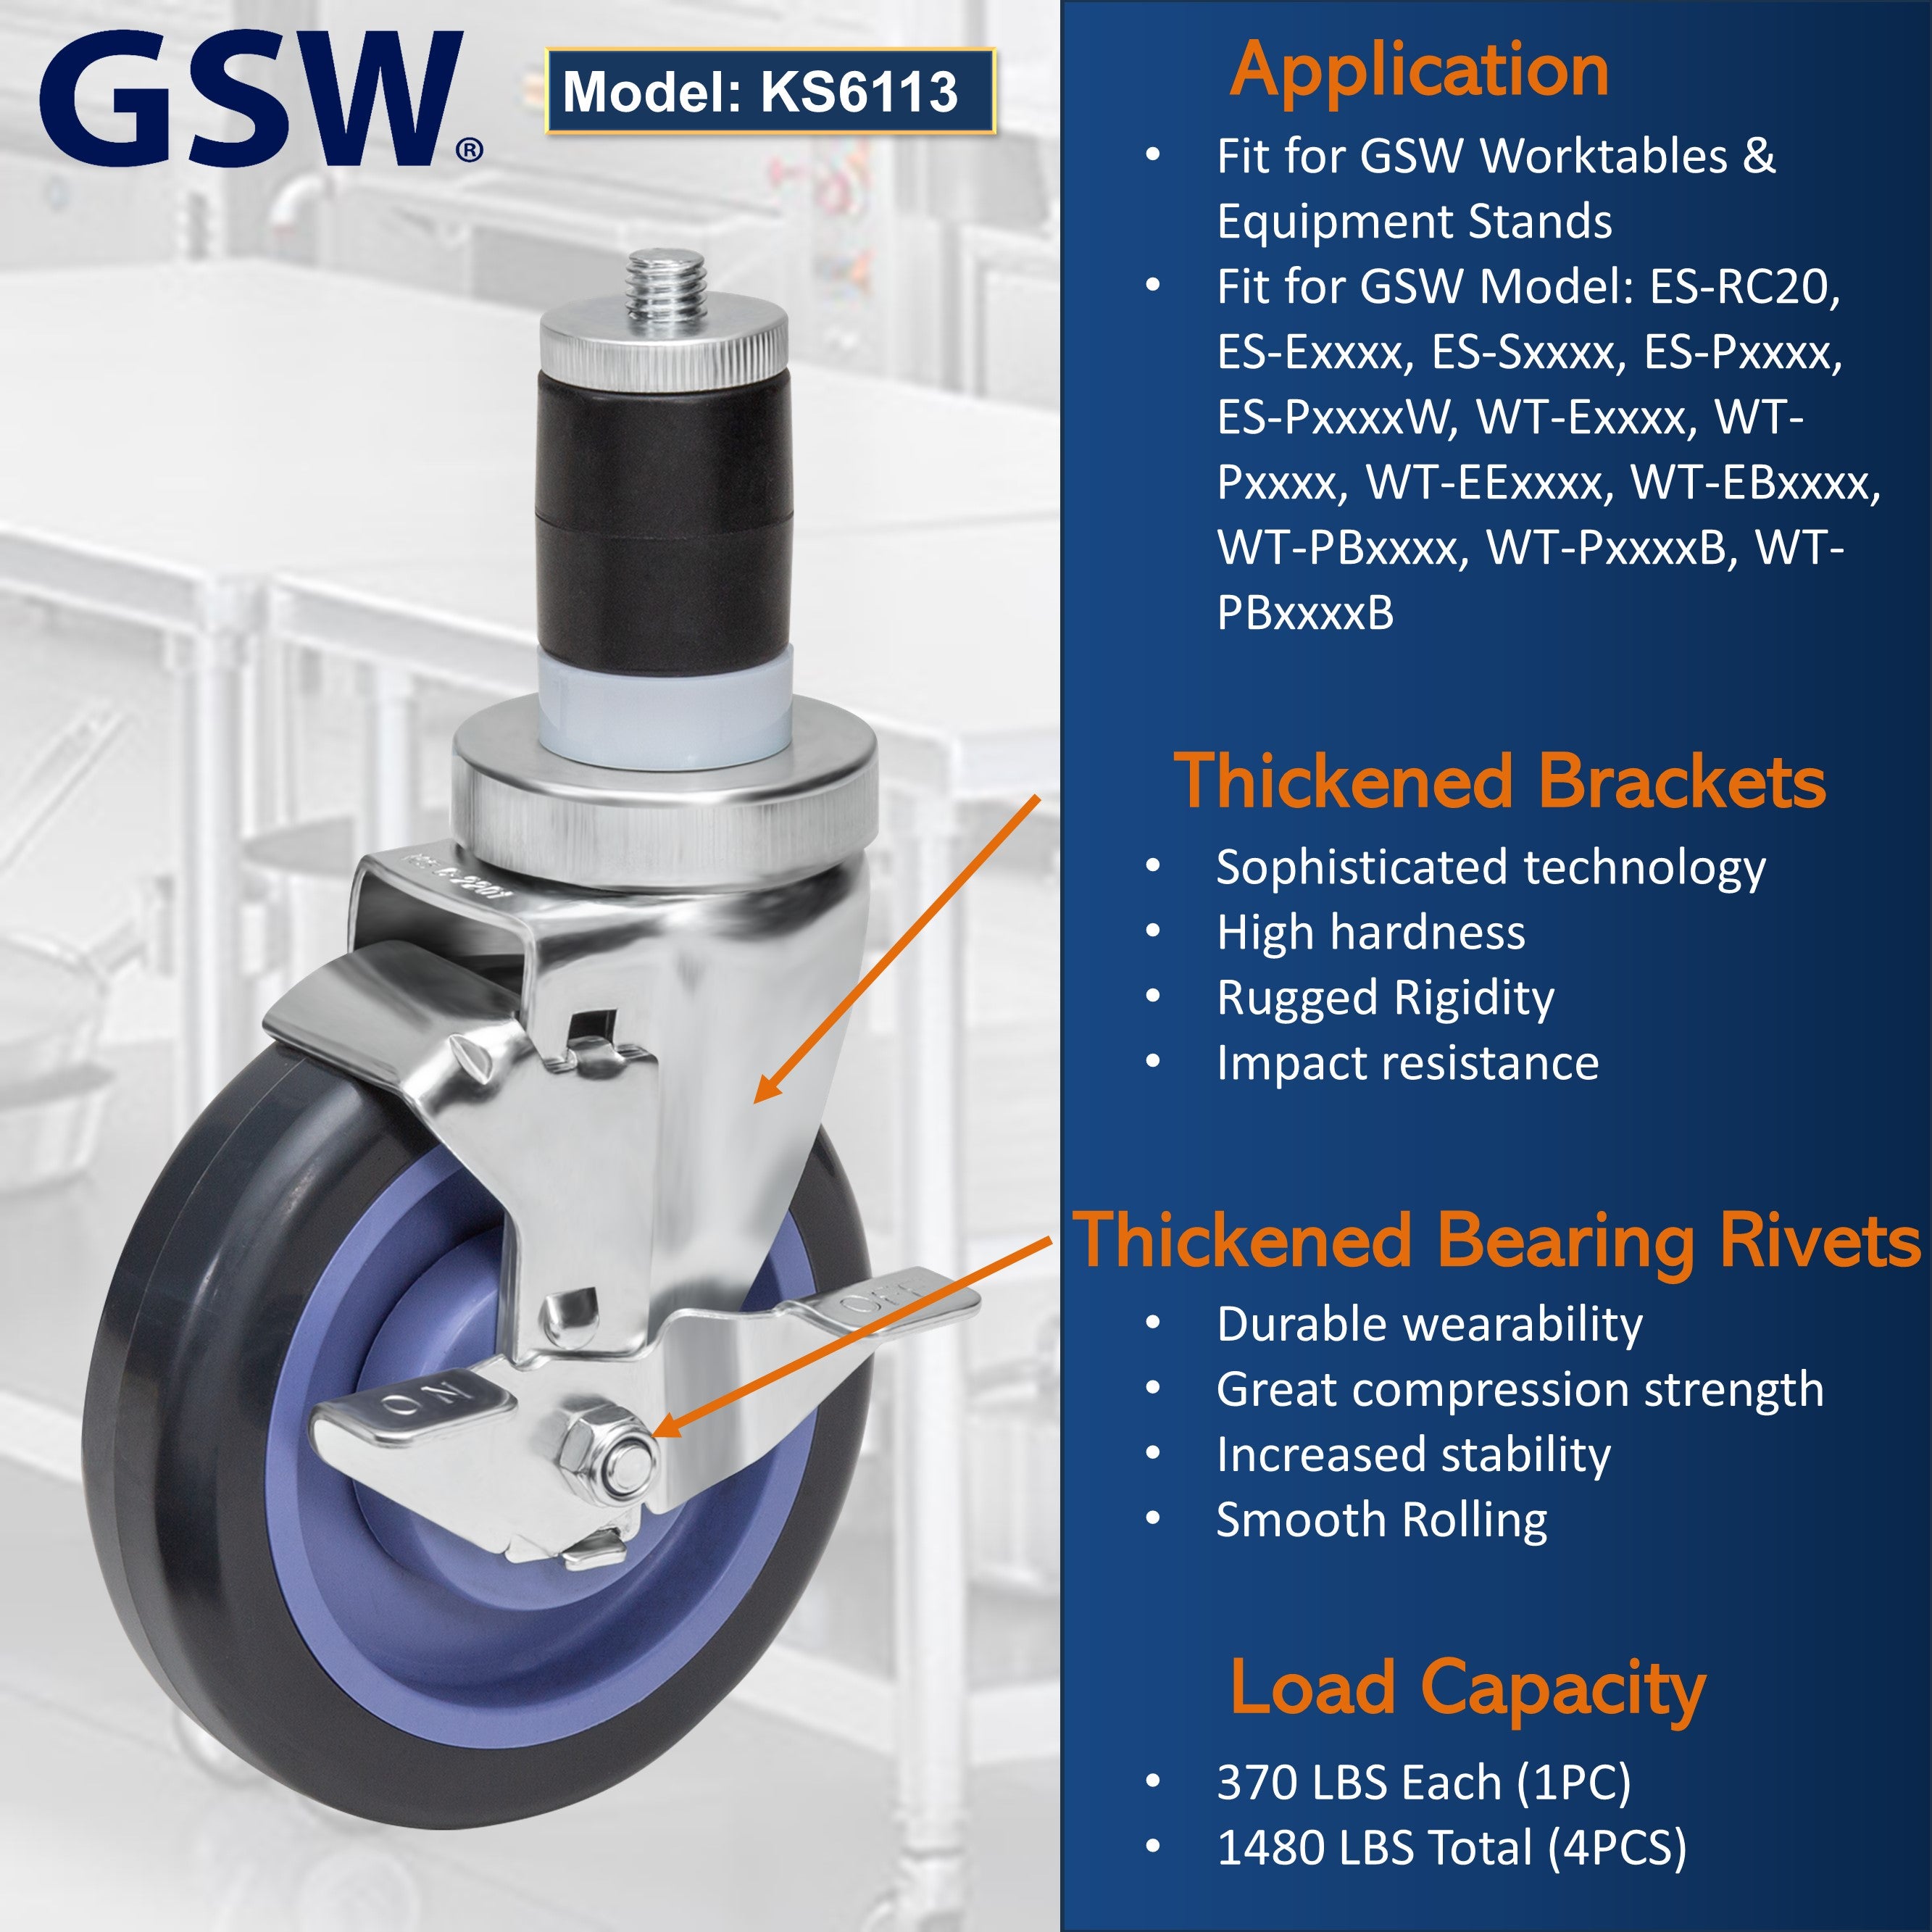 GSW 5" Heavy Duty Casters Wheels with Expanding Stem - Loading Capacity: 1480 lbs. Use for Worktables and Equipment Stands (Swivel with Brake)